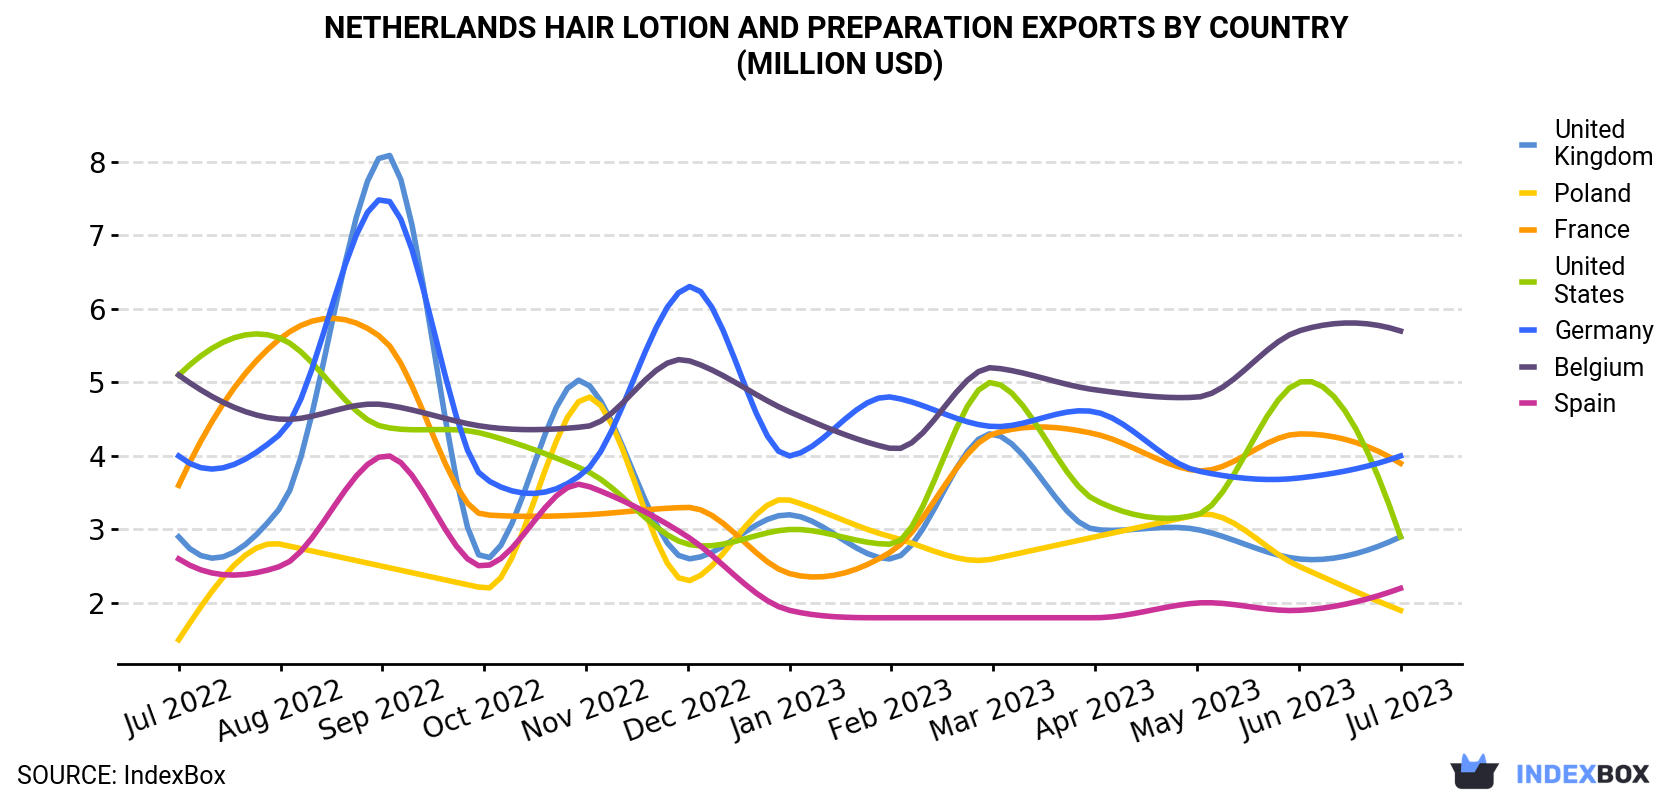 Netherlands Hair Lotion and Preparation Exports By Country (Million USD)